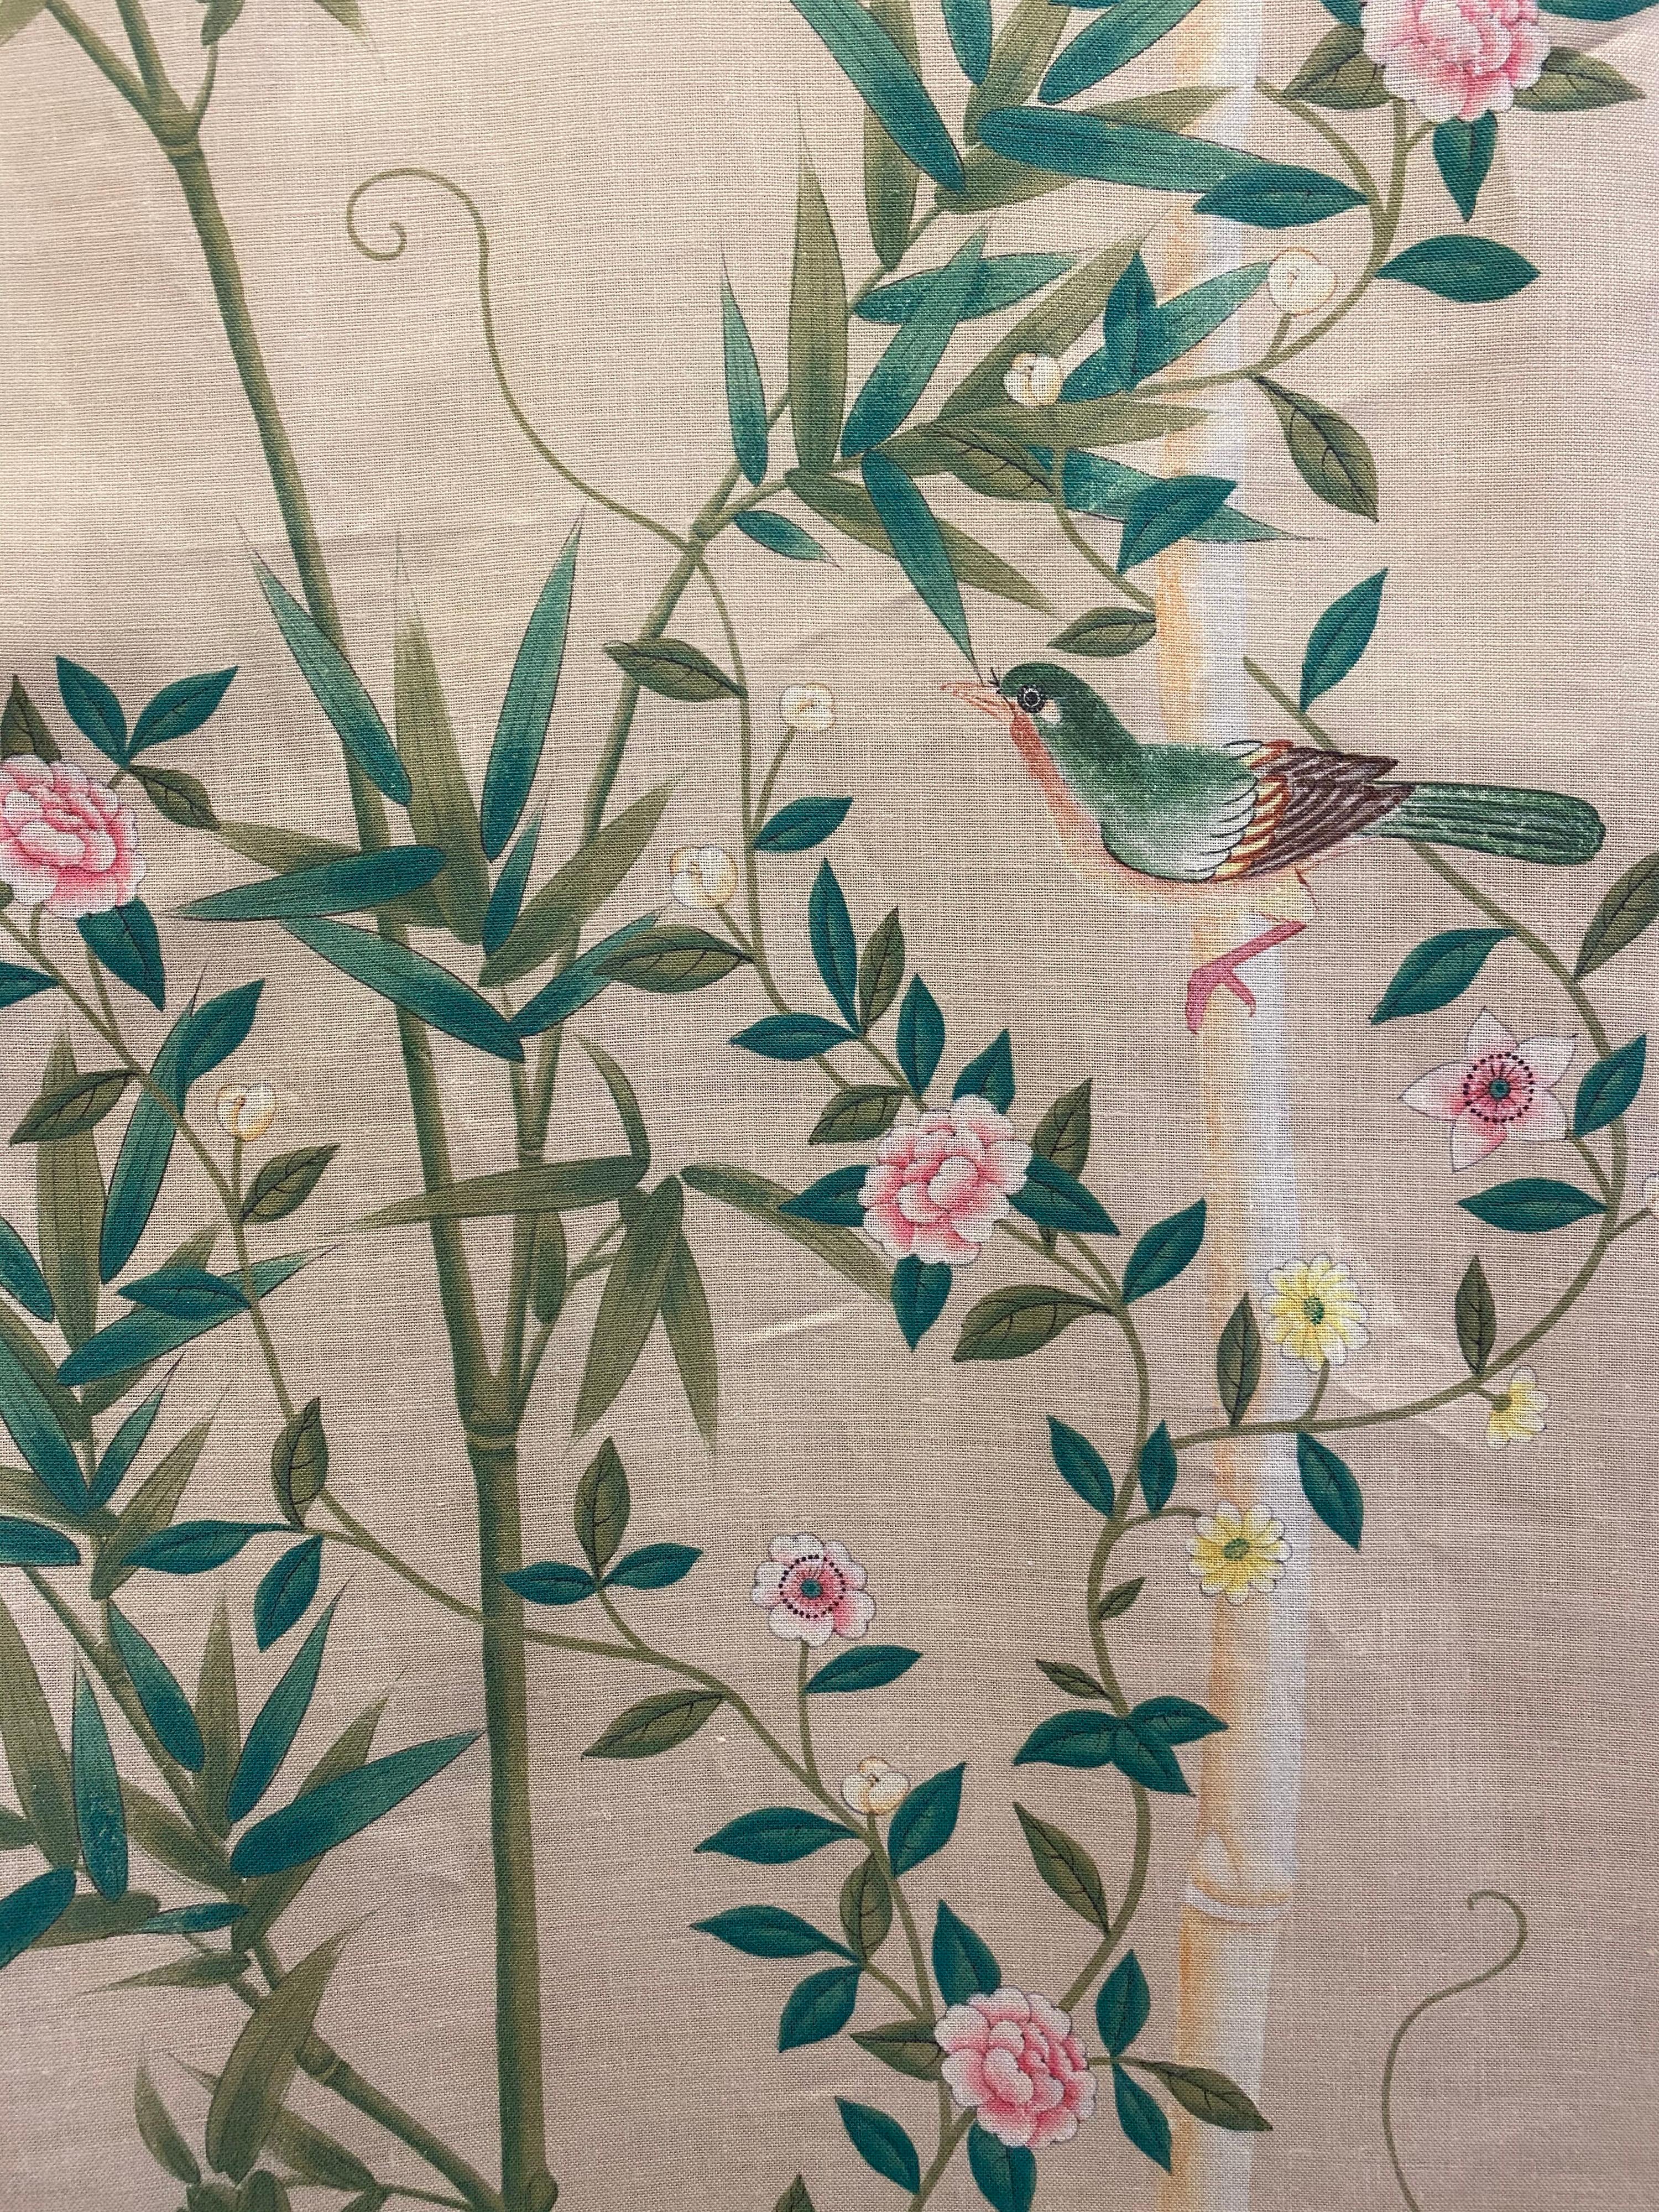 Gracie, the 5th generation firm established in 1898 and known for their exquisite hand painted wallpapers now has a line of linen fabrics featuring six of their iconic patterns.

This is bamboo grove, with flowering trees, birds, butterflies and